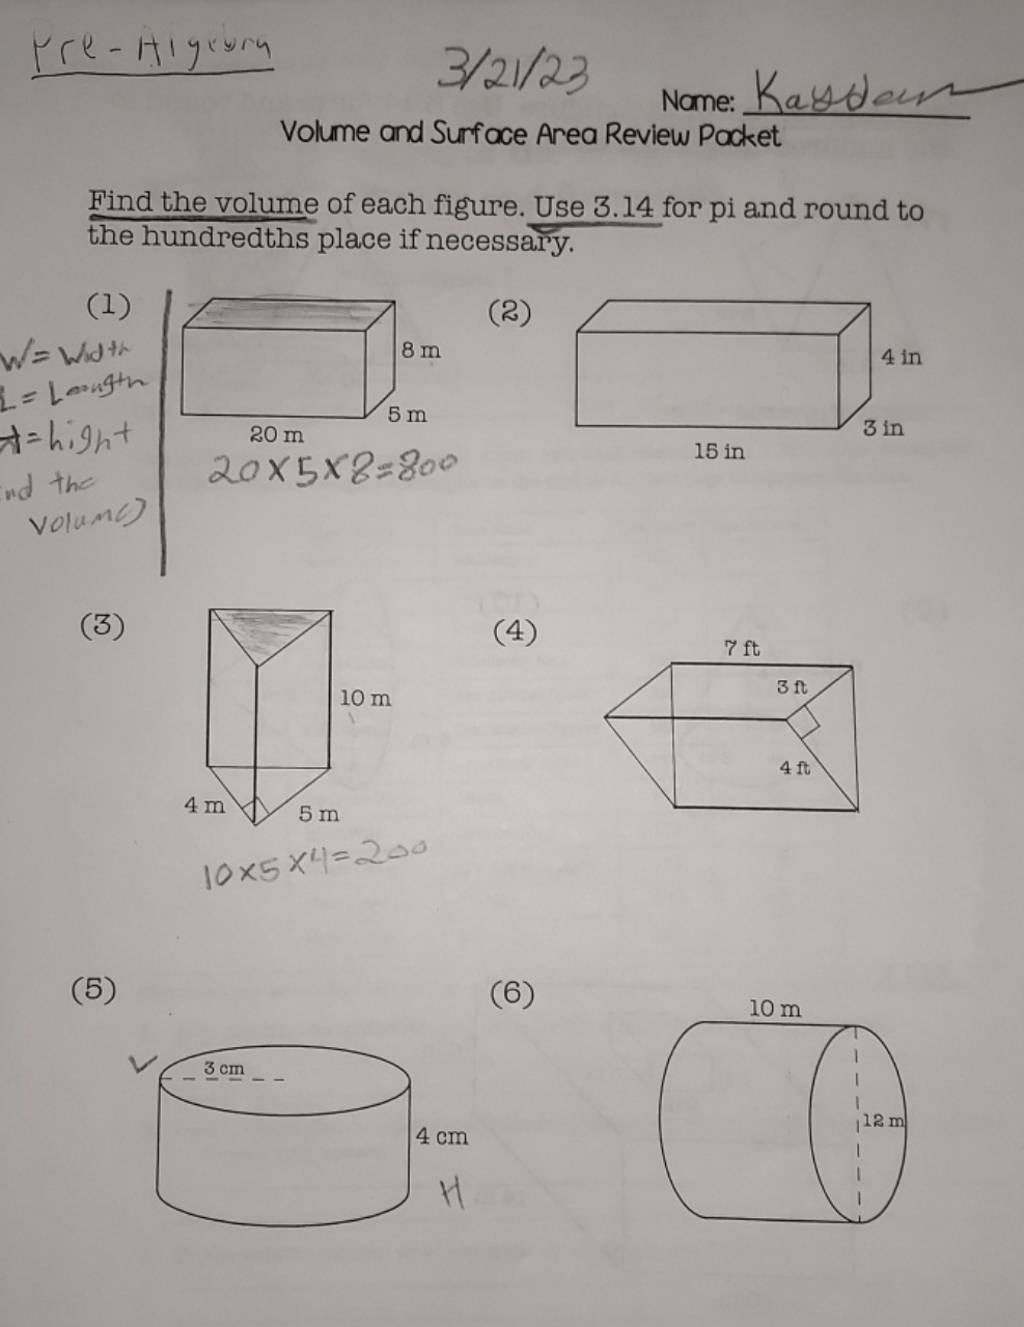 Volume and Surface Area Review Packet